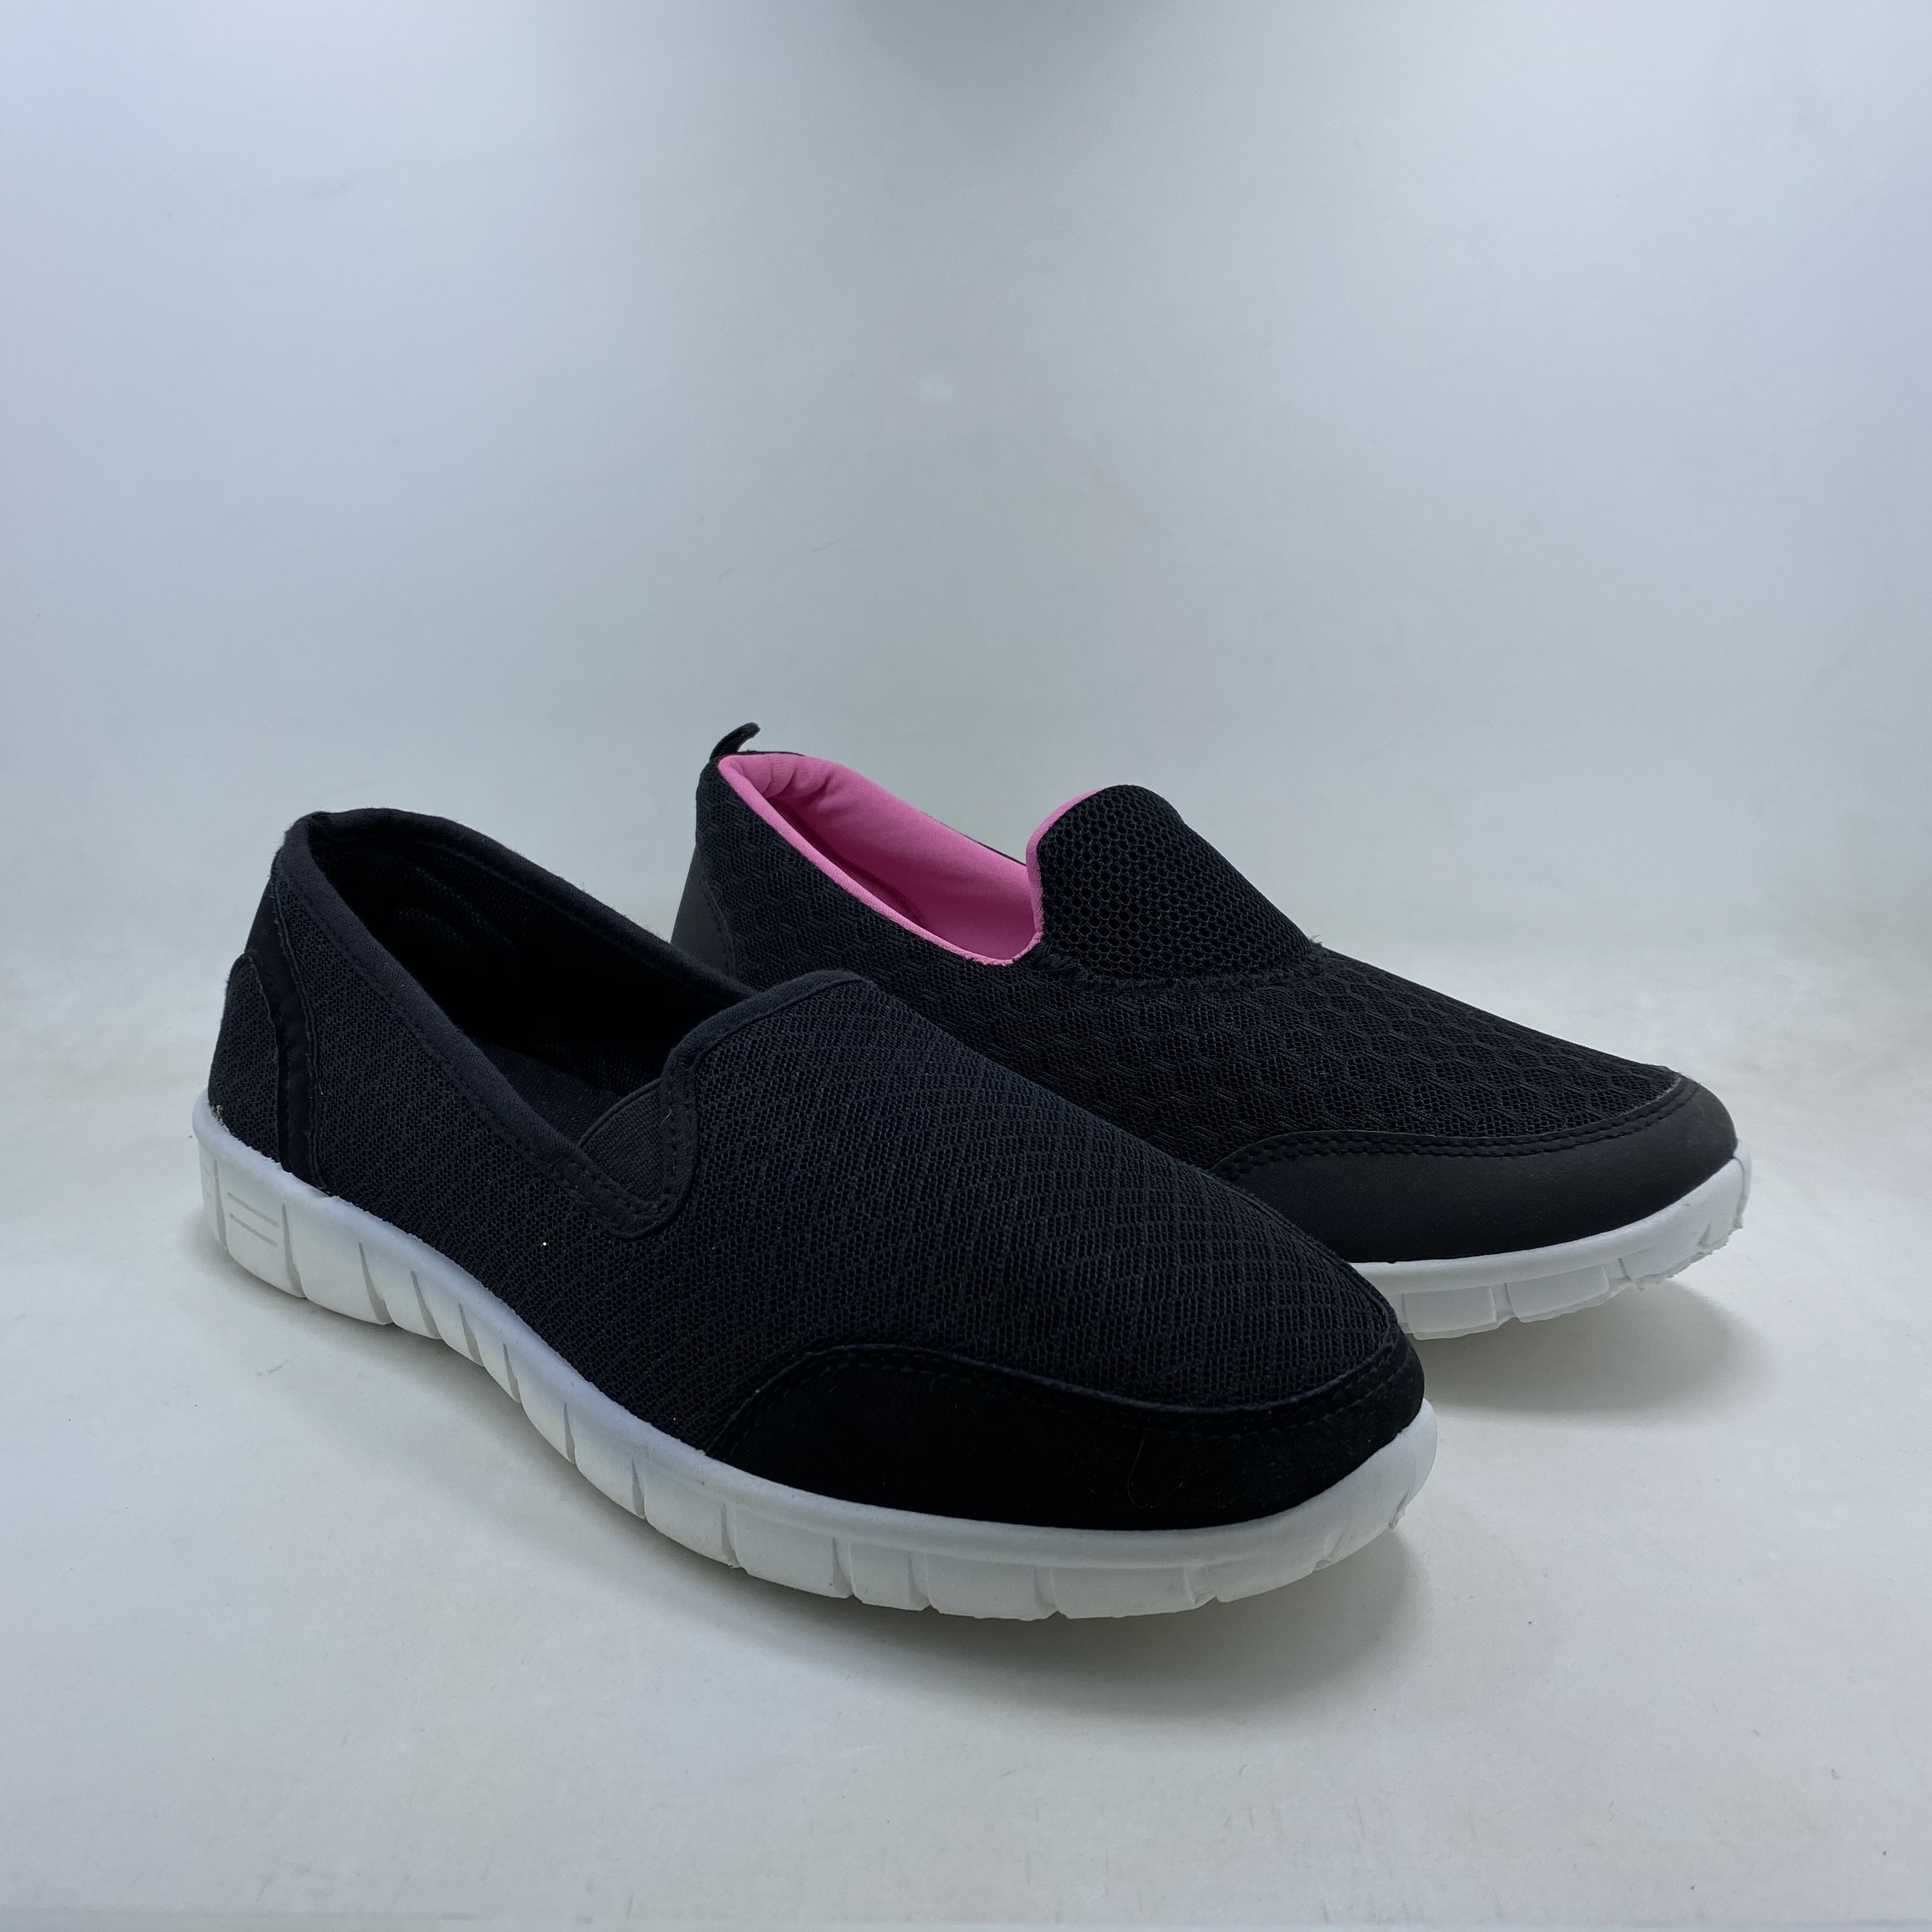 Women's Comfortable Casual Shoes Slip On Loafers